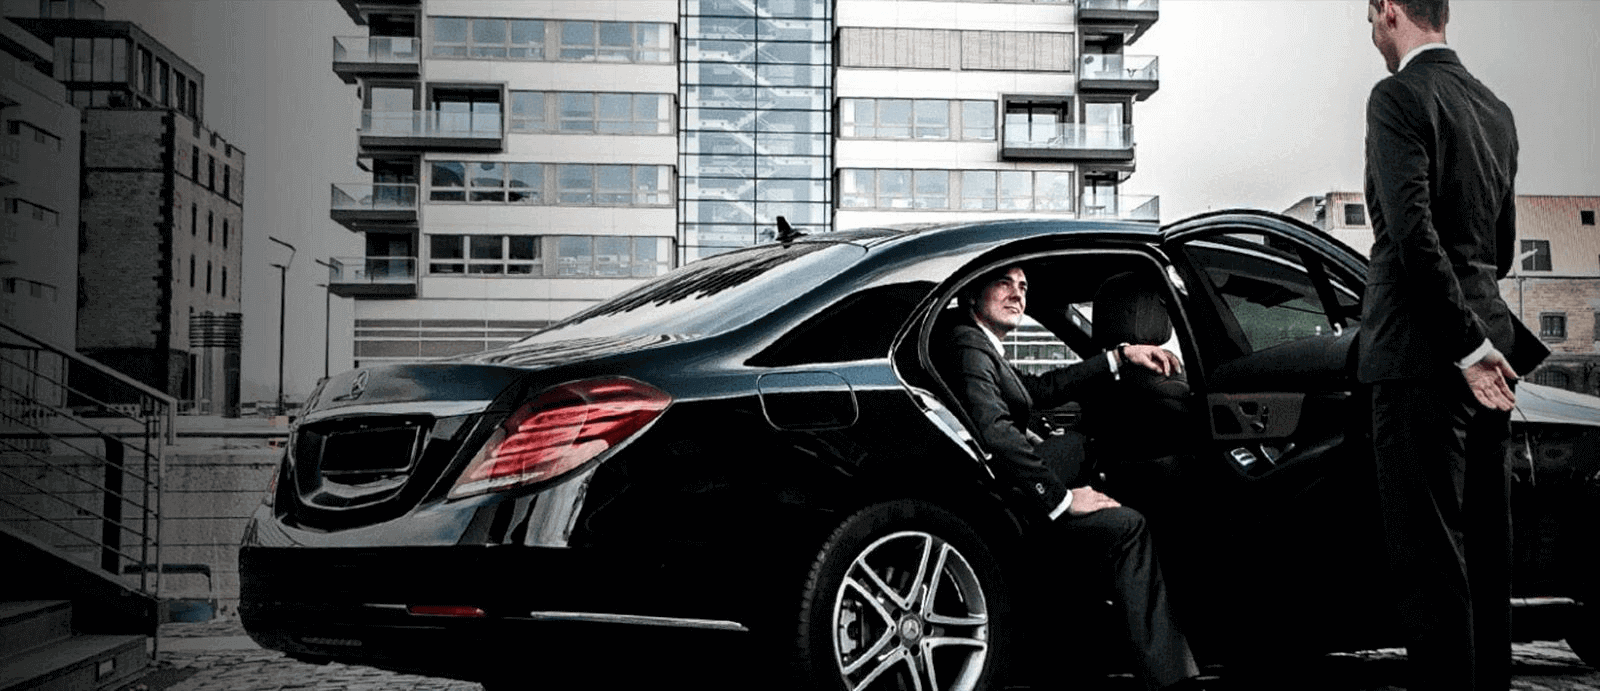 Professional Chauffeur service to Hire within your budget - London Other